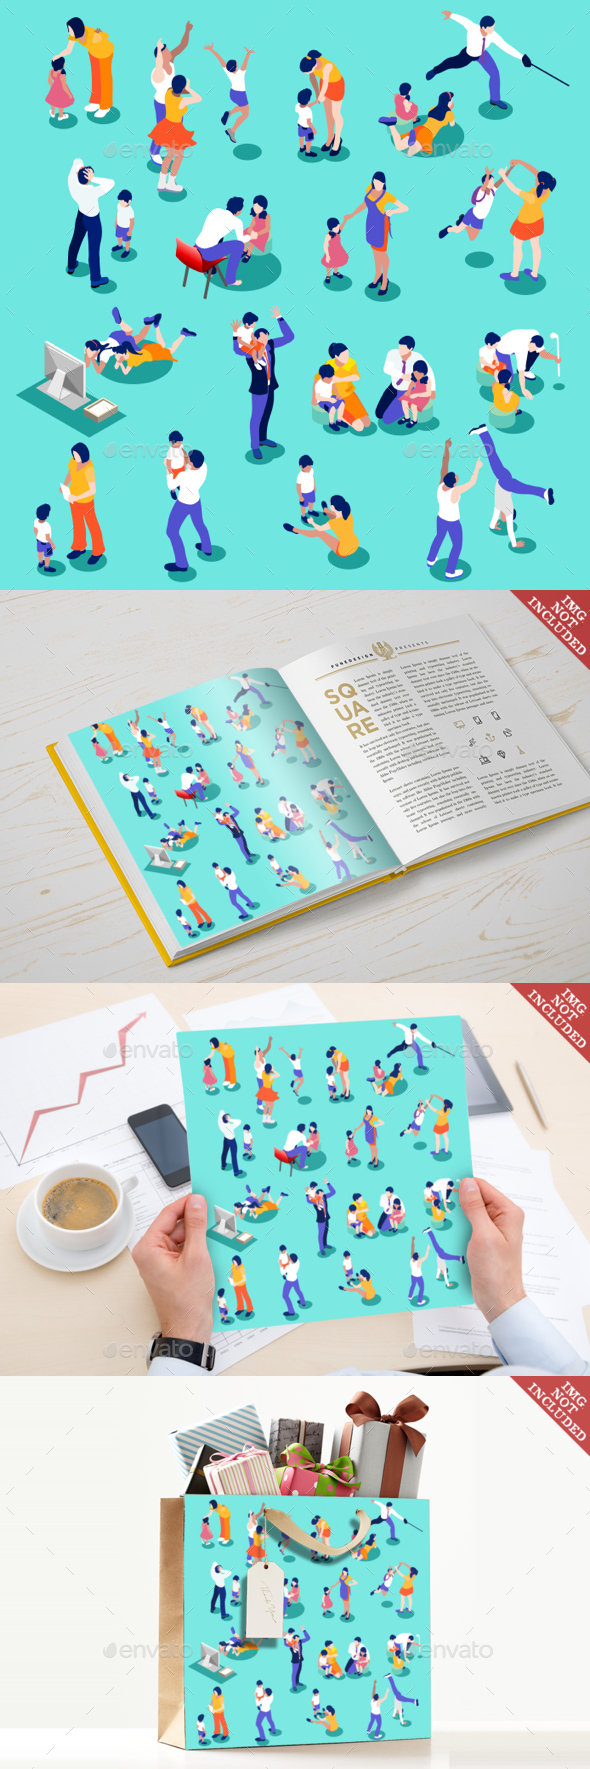 Family Time Set Isometric People